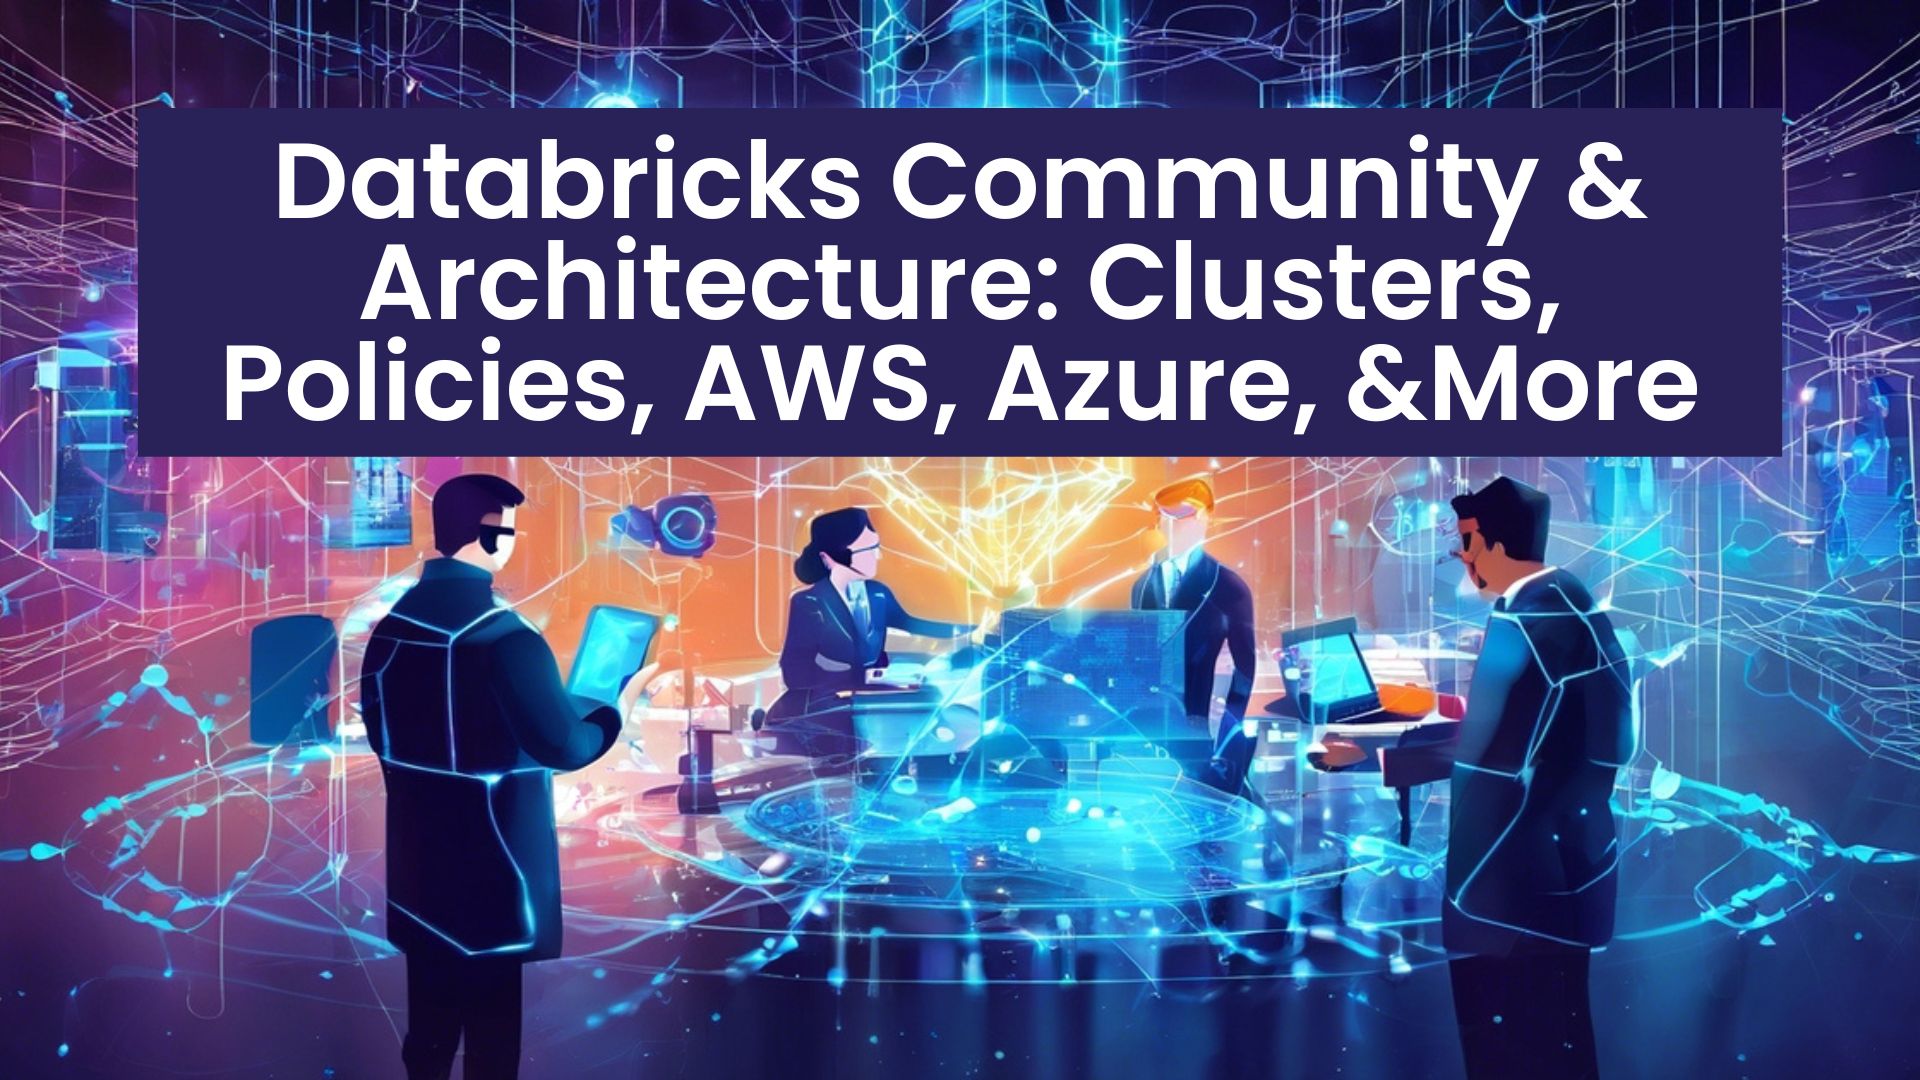 Databricks Community & Architecture Clusters, Policies, AWS, Azure, and More